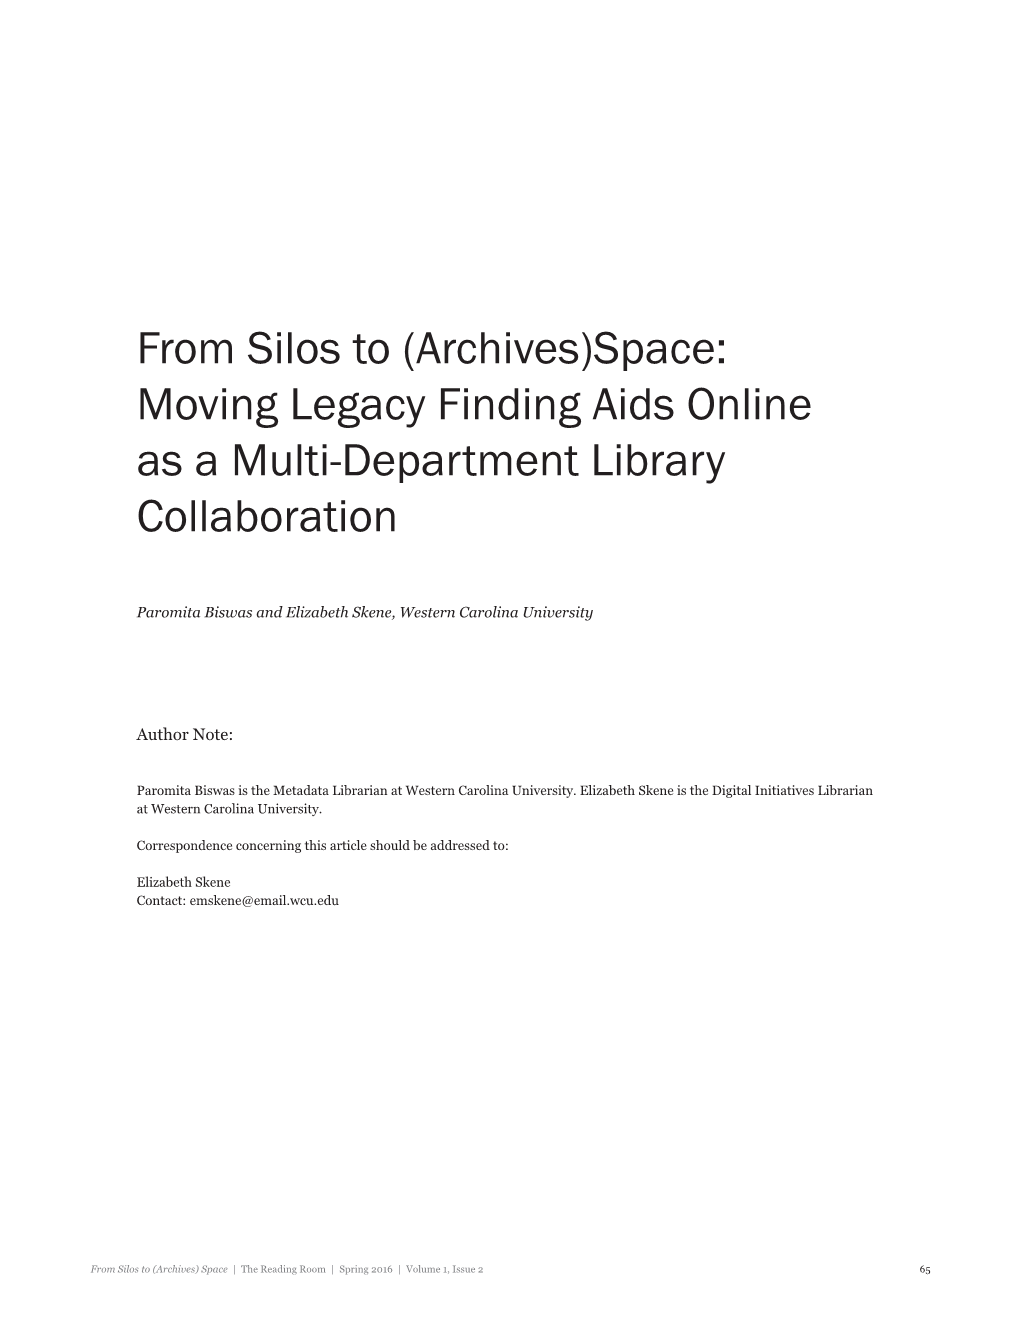 From Silos to Archives Space